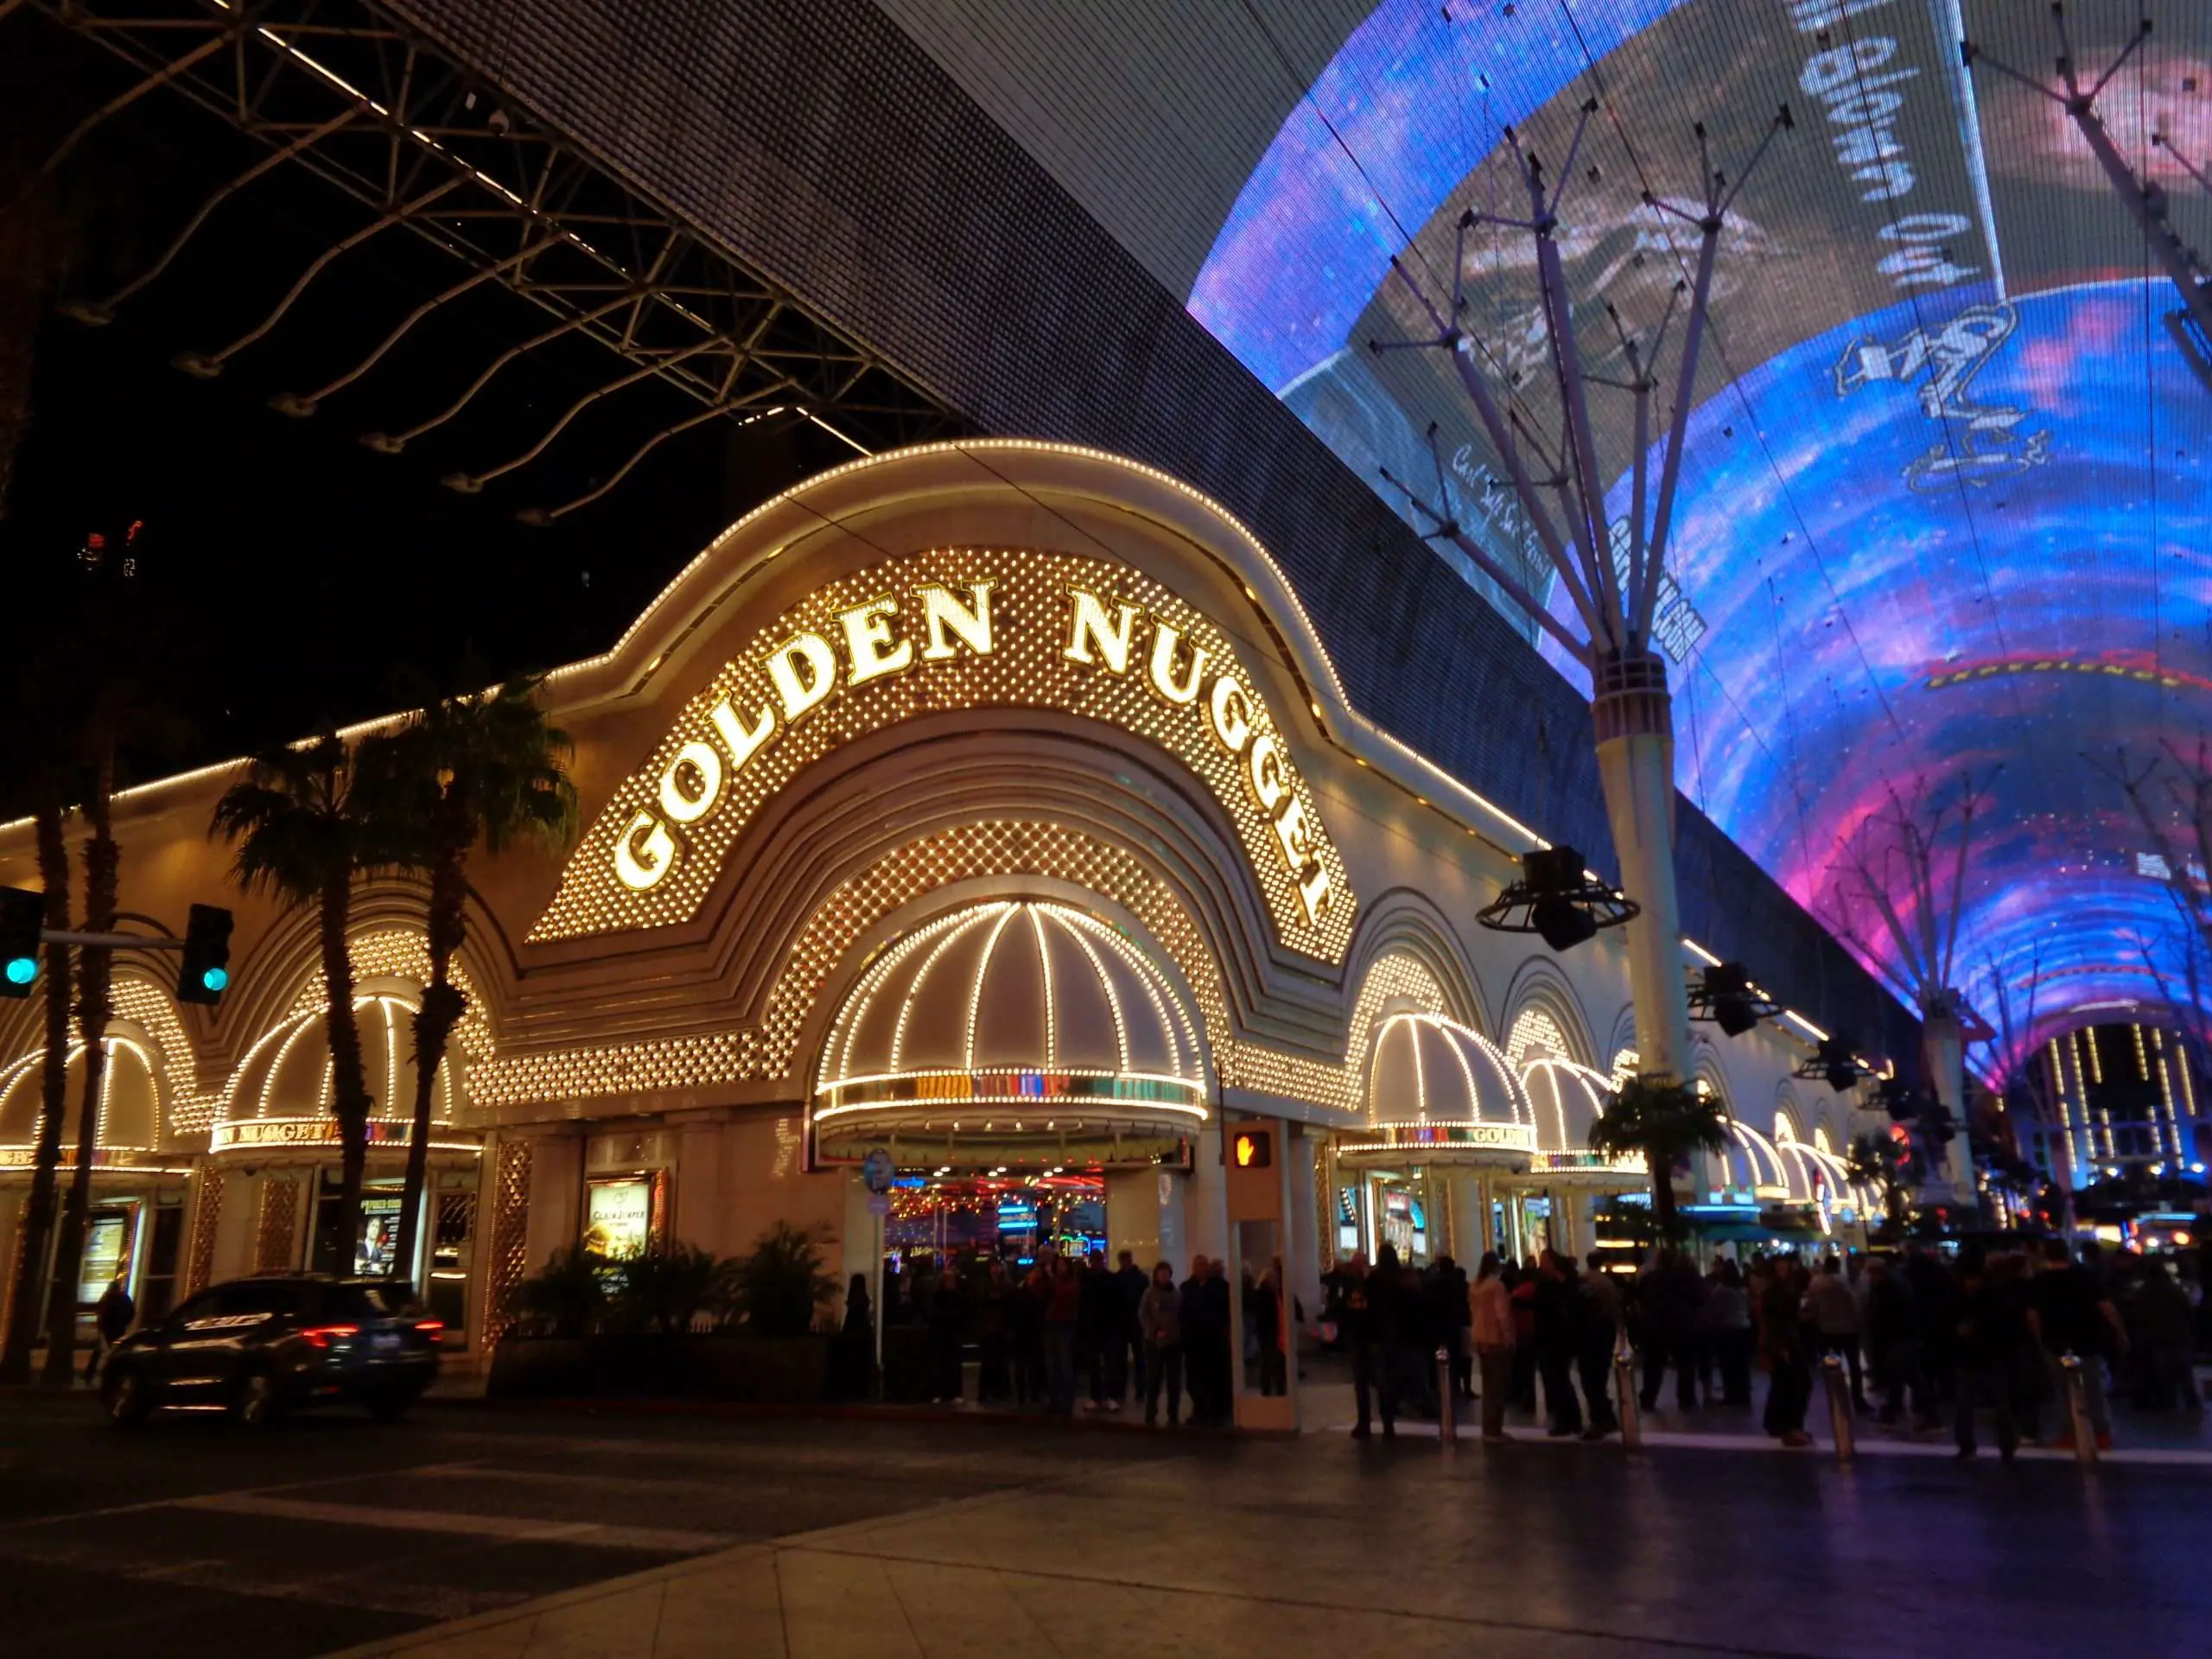 Golden Nugget Adding New Lighting Features Throughout Casino